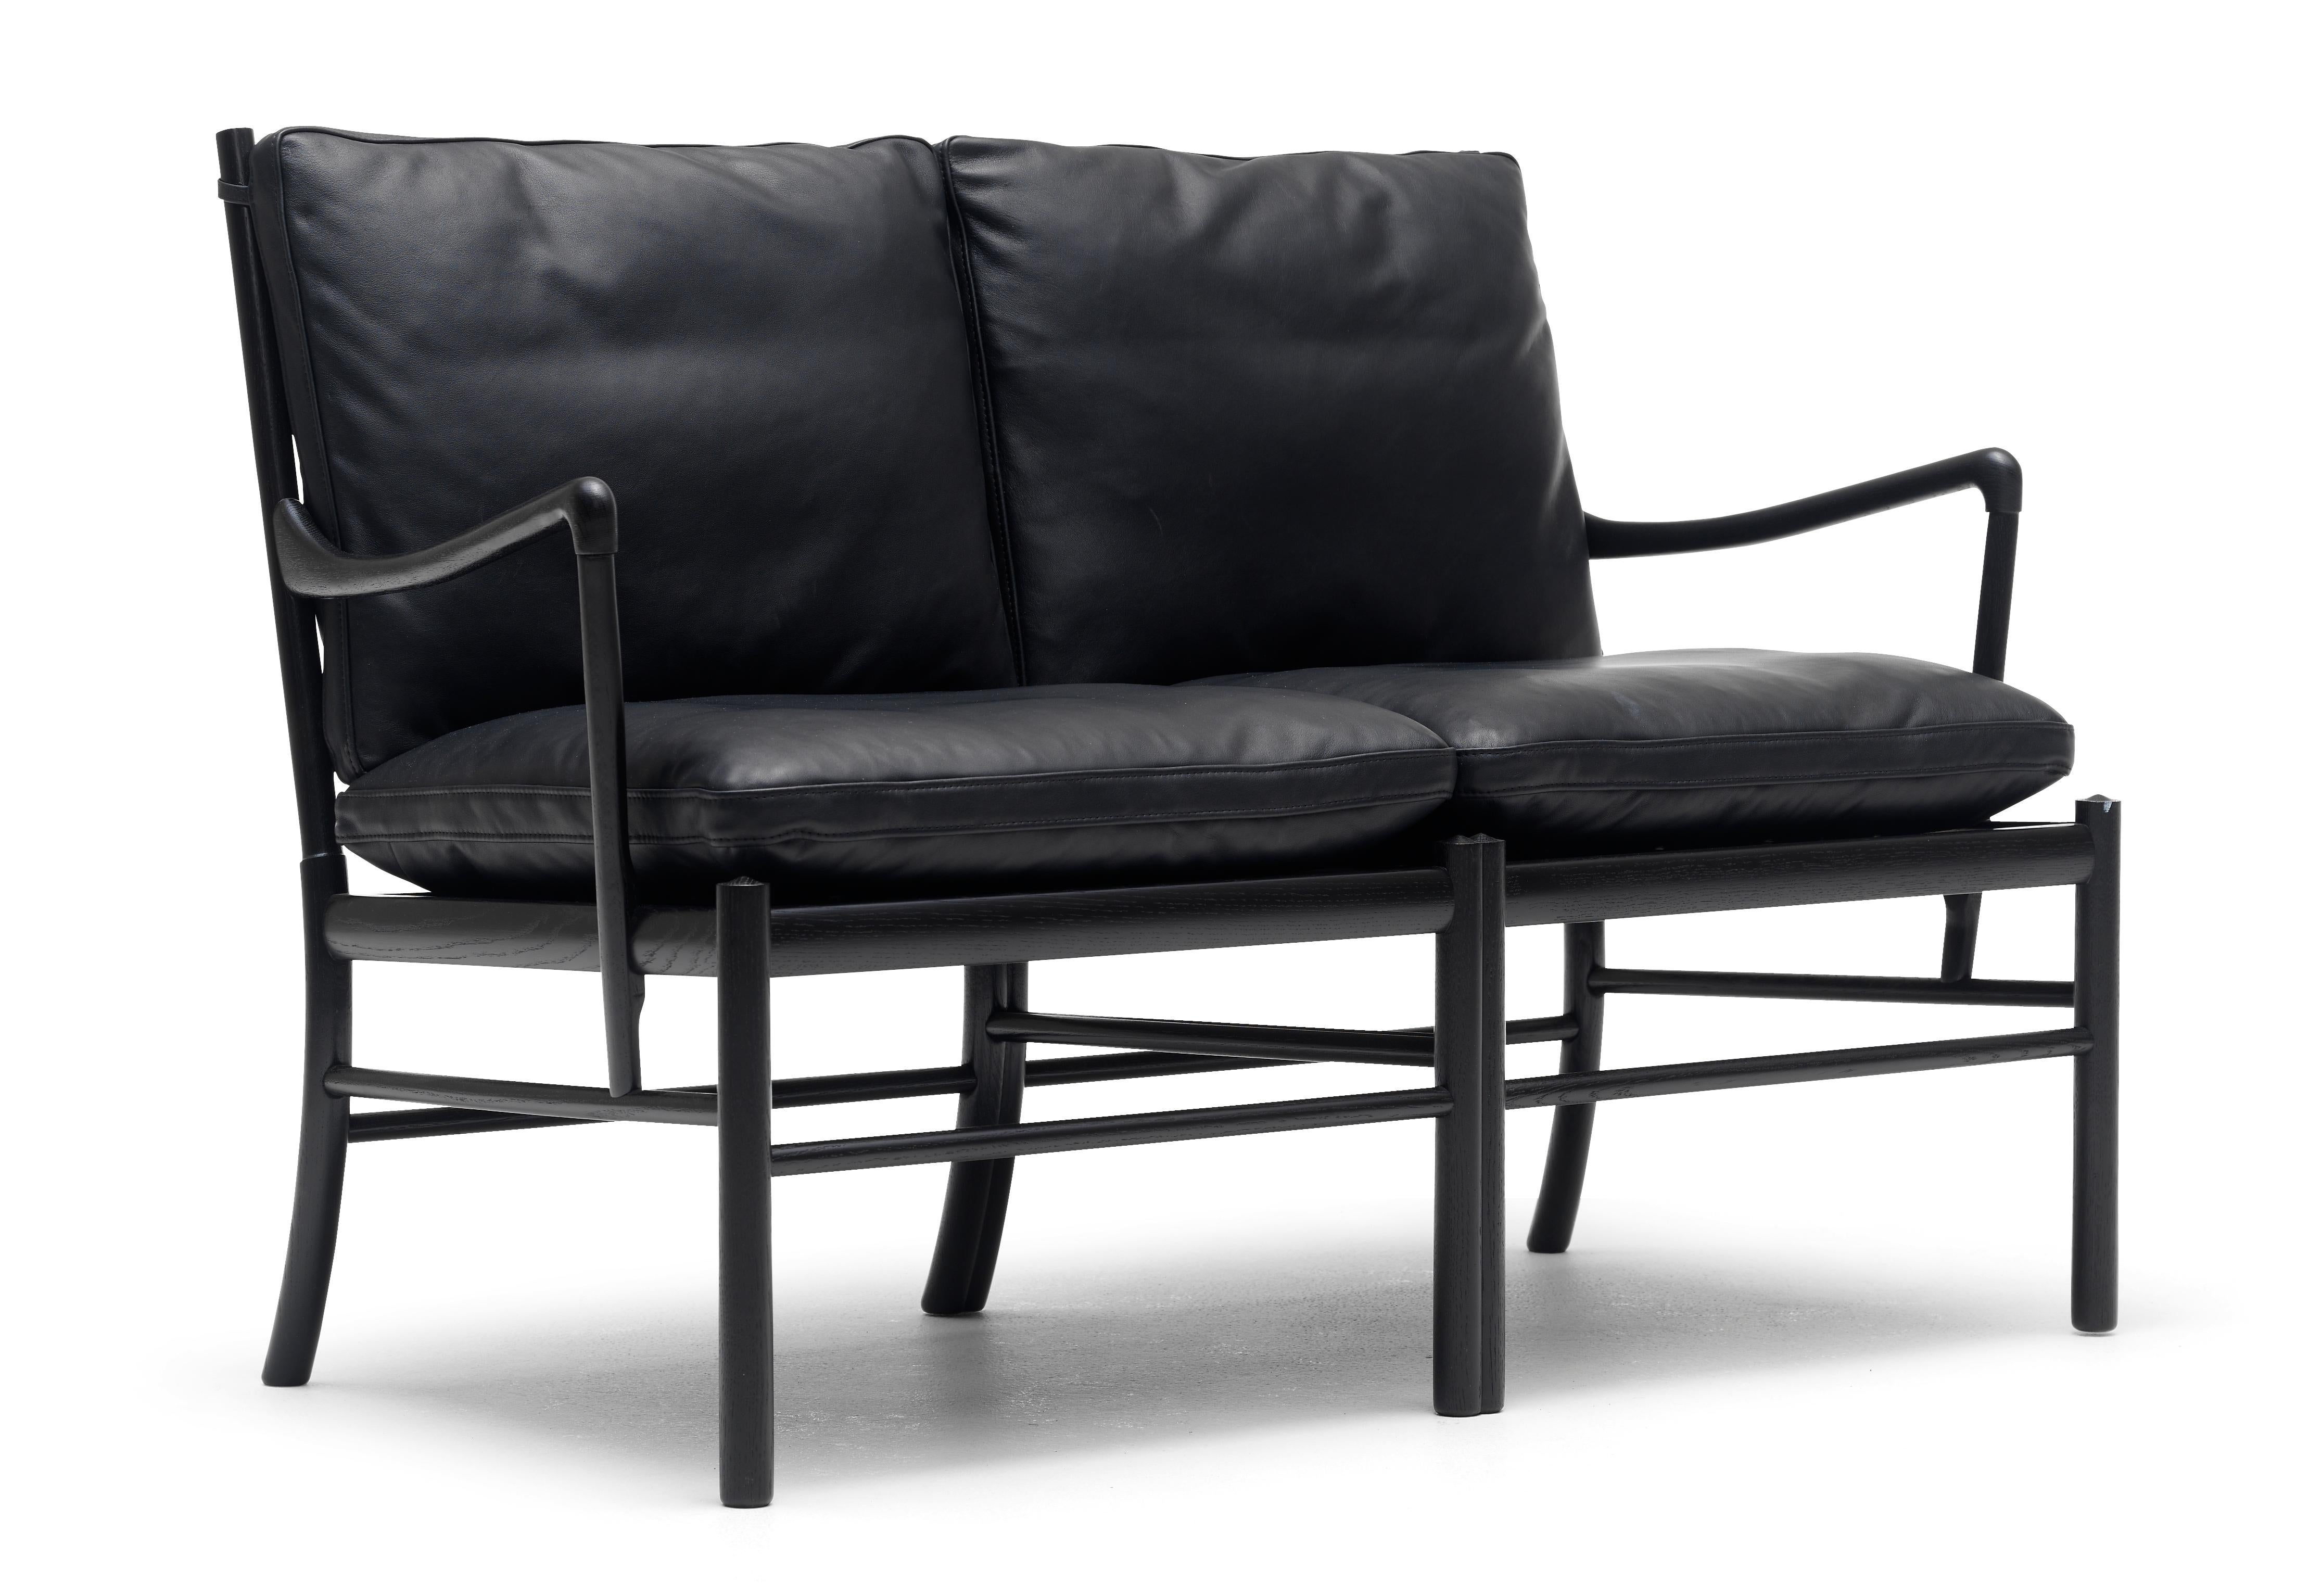 Black (Sif 98) OW149-2 Colonial Sofa in Oak Painted Black by Ole Wanscher 2